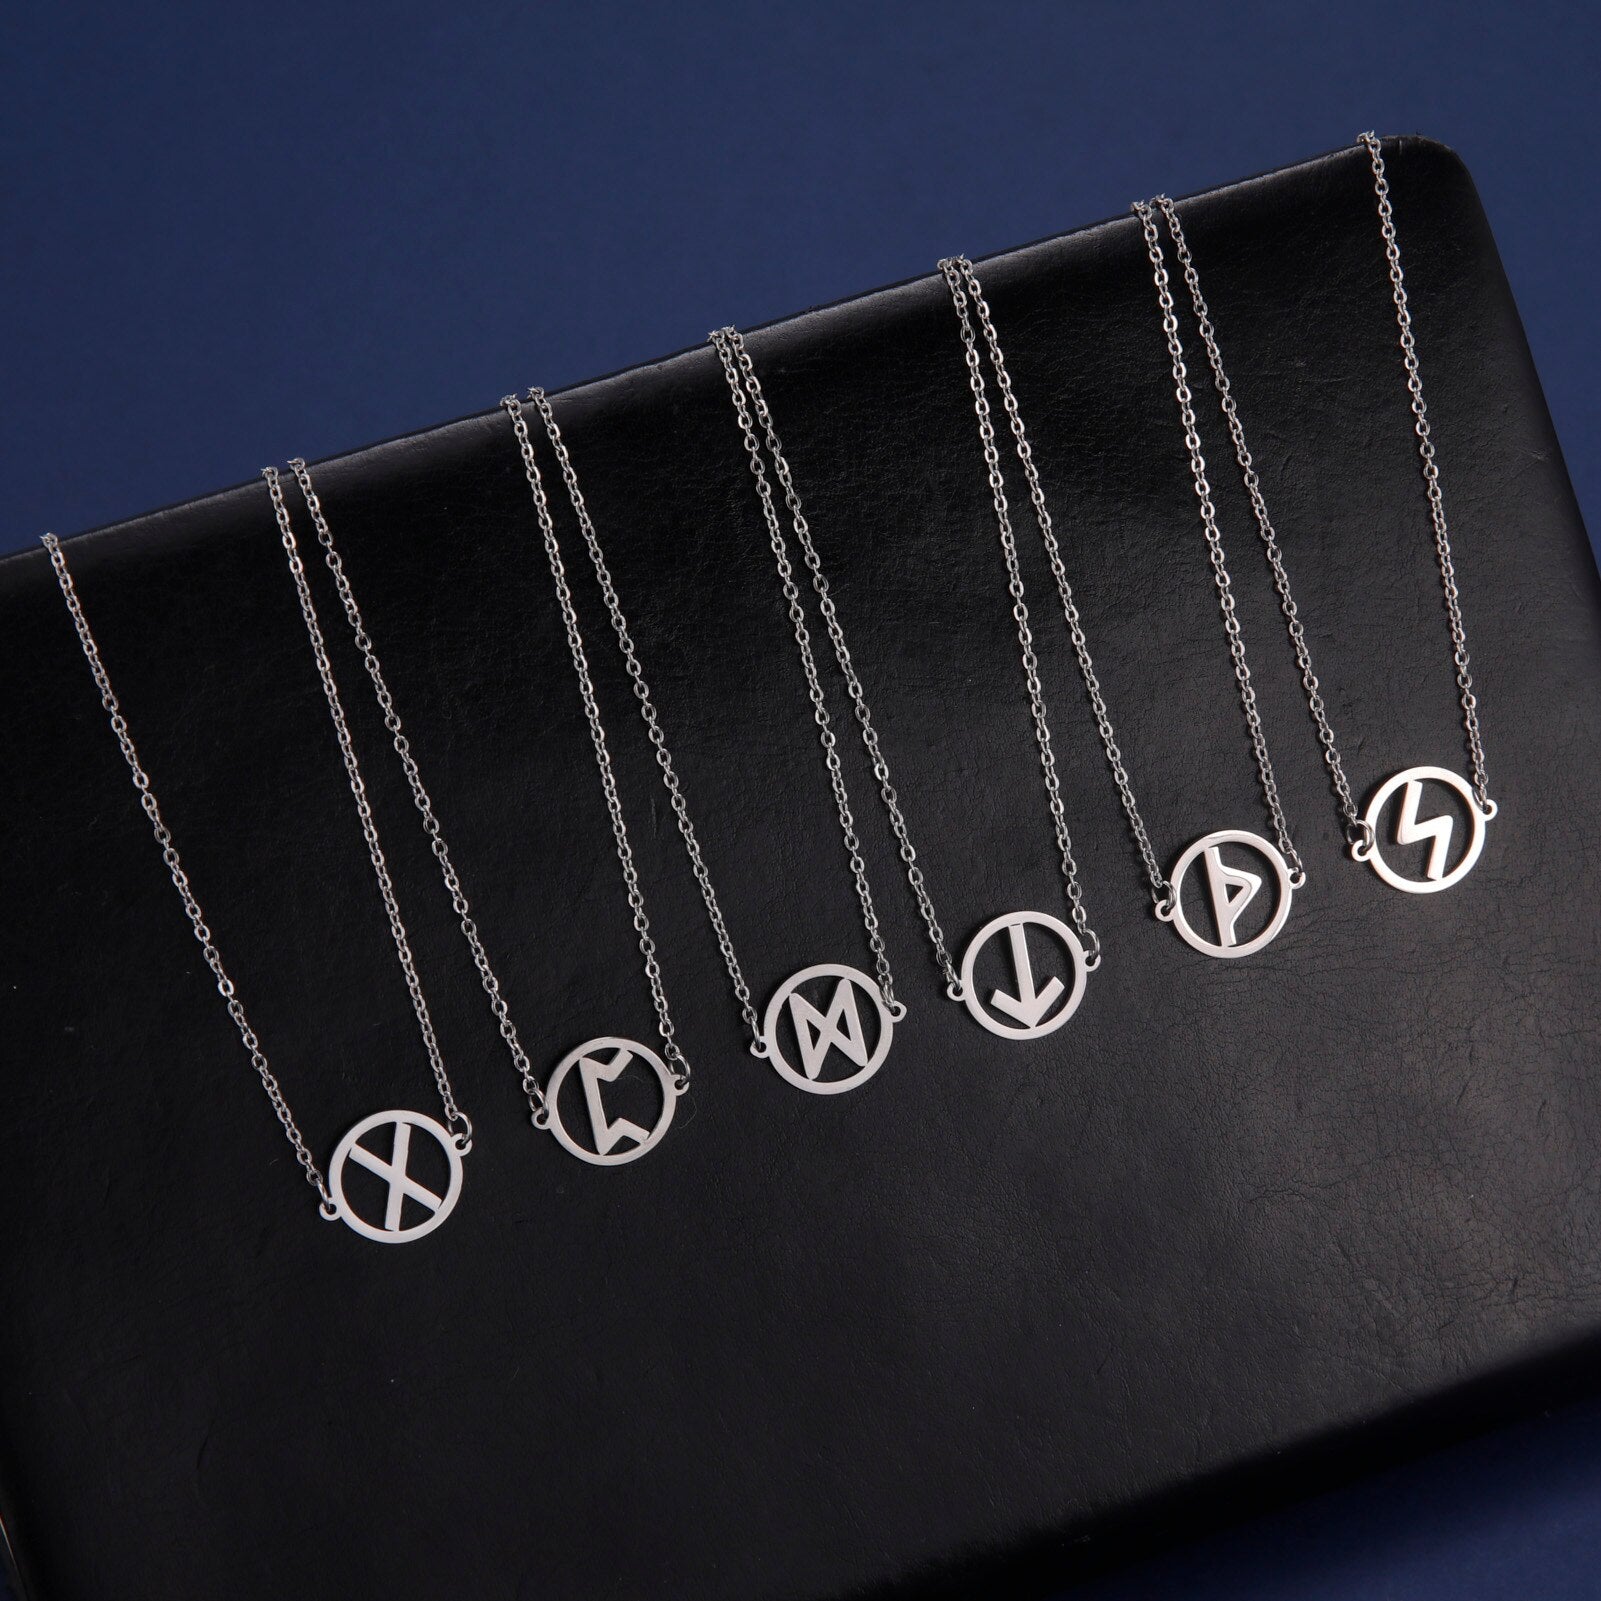 Vintage Norse Rune Charm Necklaces for Women Men Stainless Steel Viking Jewelry Ancient Patron Saint Amulet Valentine's Day